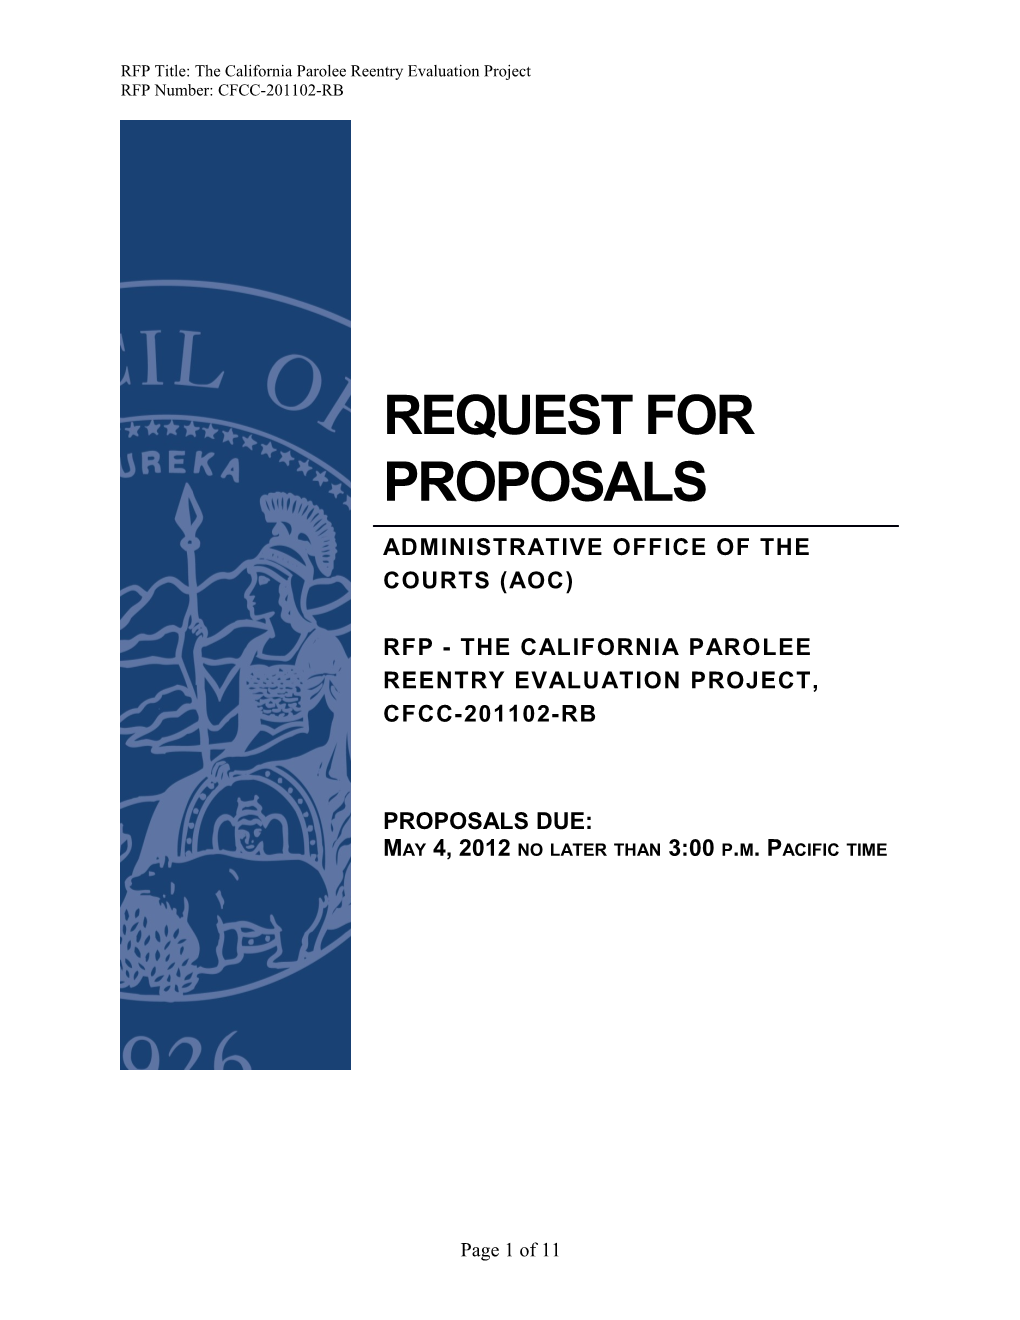 RFP Title: the California Parolee Reentry Evaluation Project